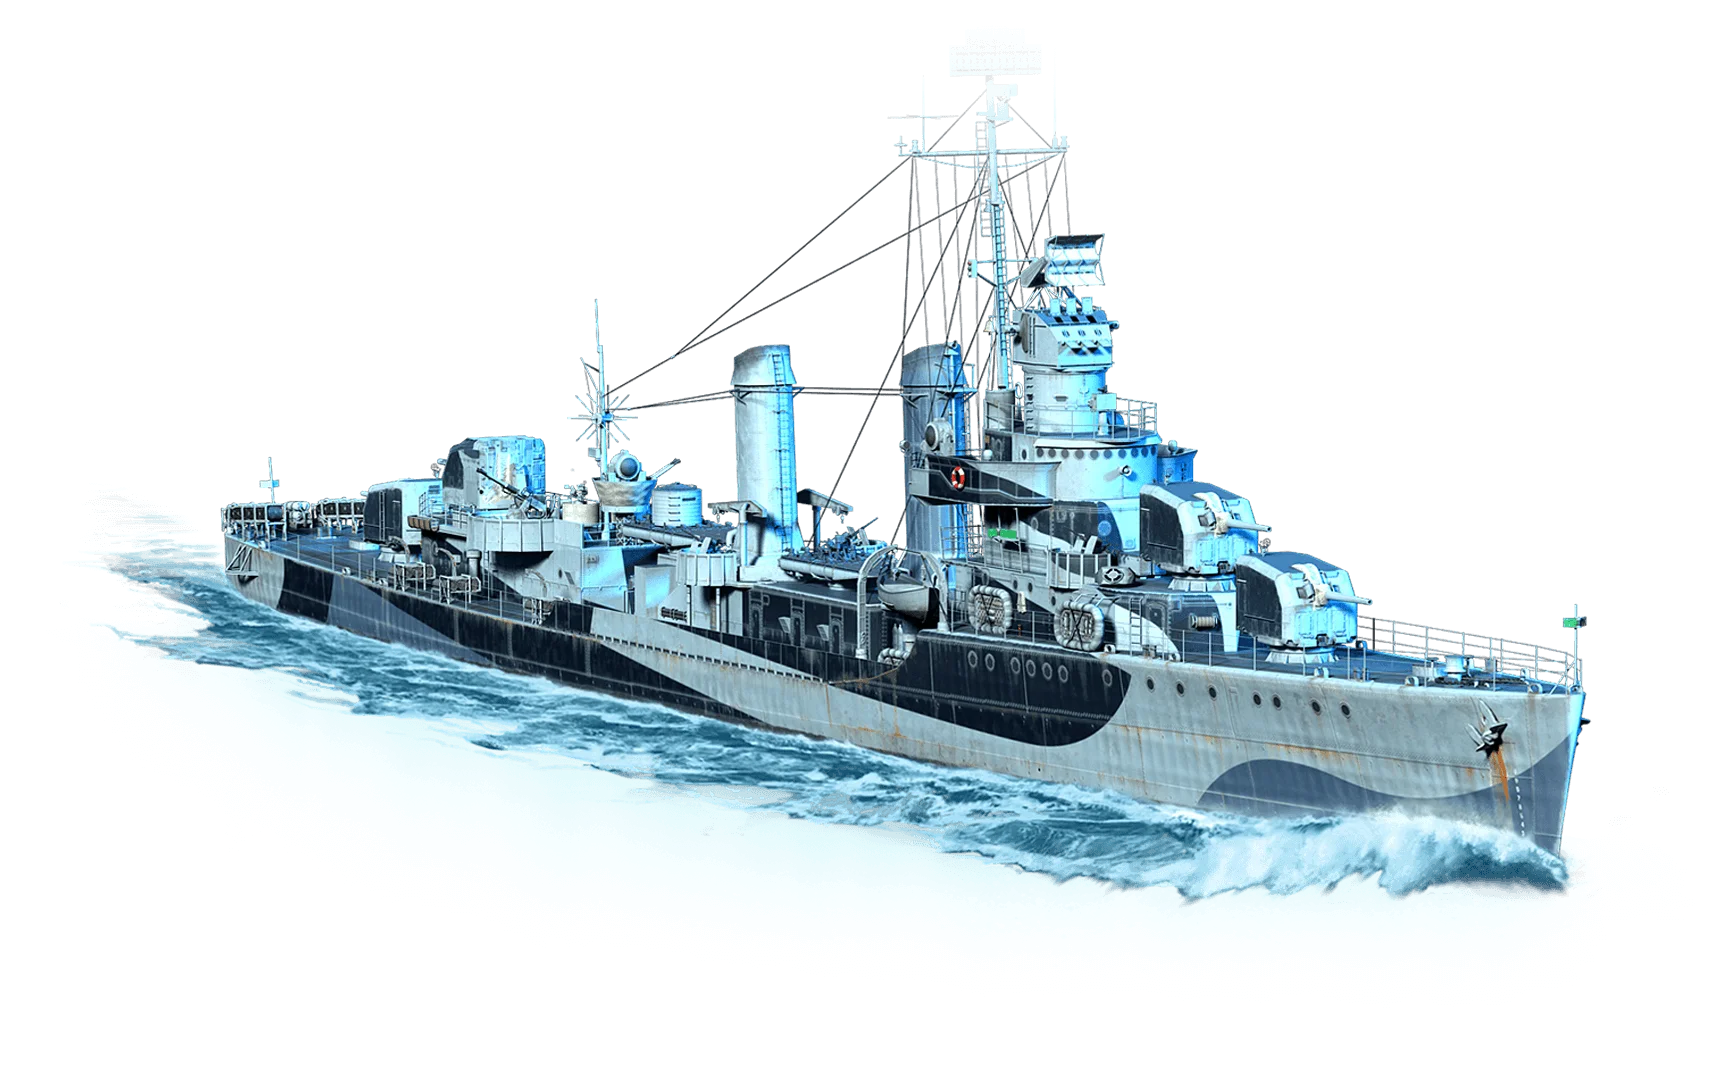 Sims from World Of Warships: Legends